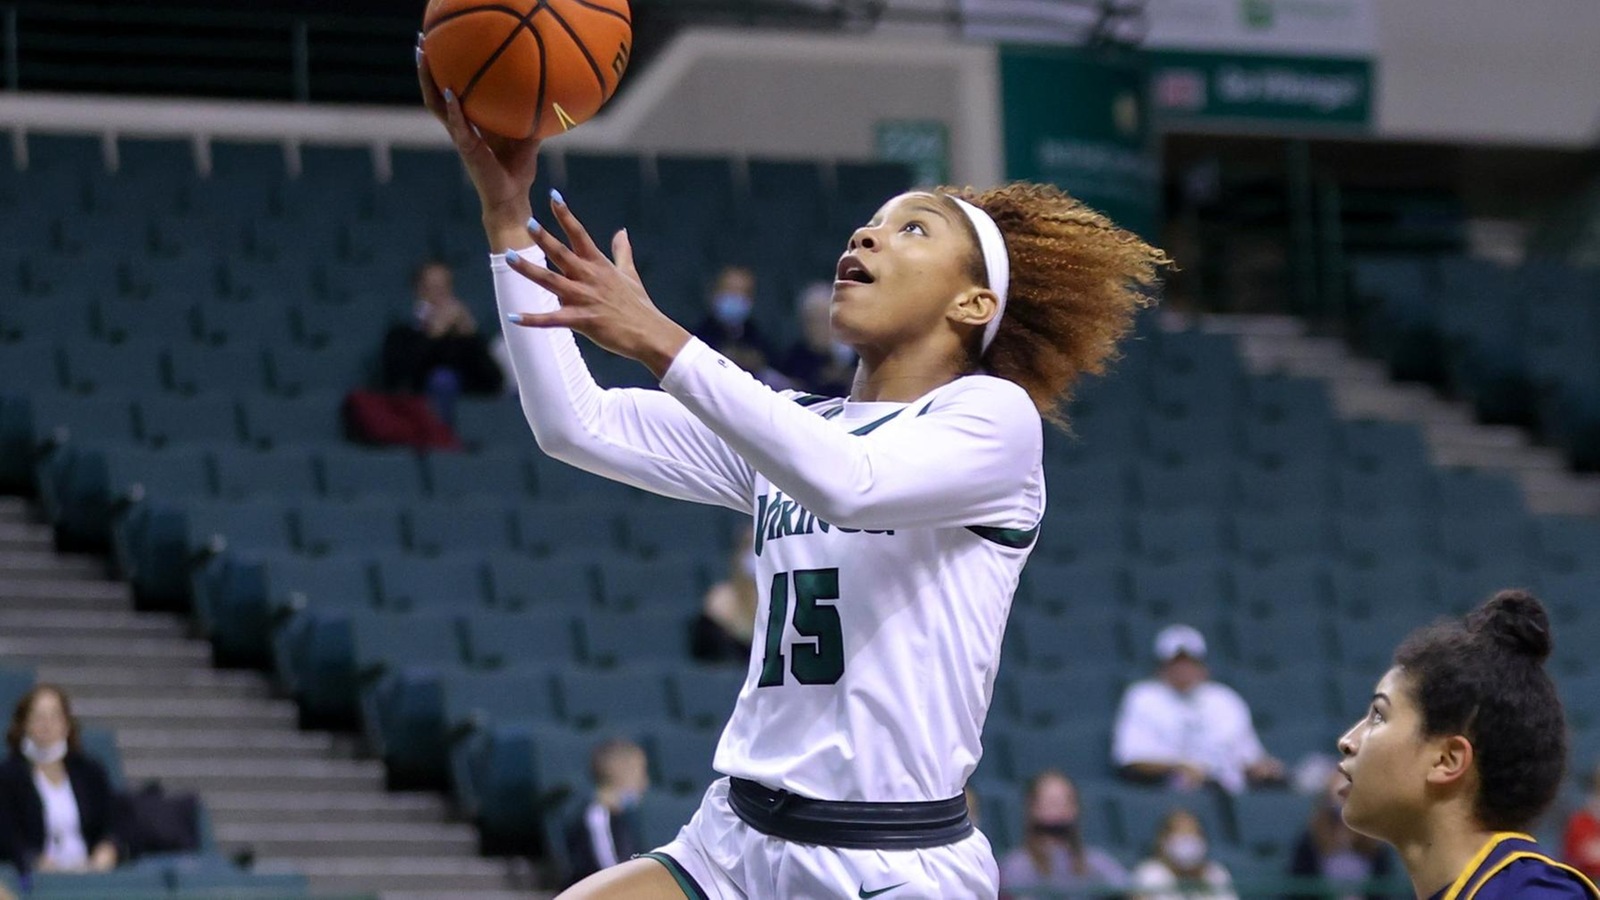 Cleveland State Women’s Basketball Earns 81-54 Victory In Season Opener